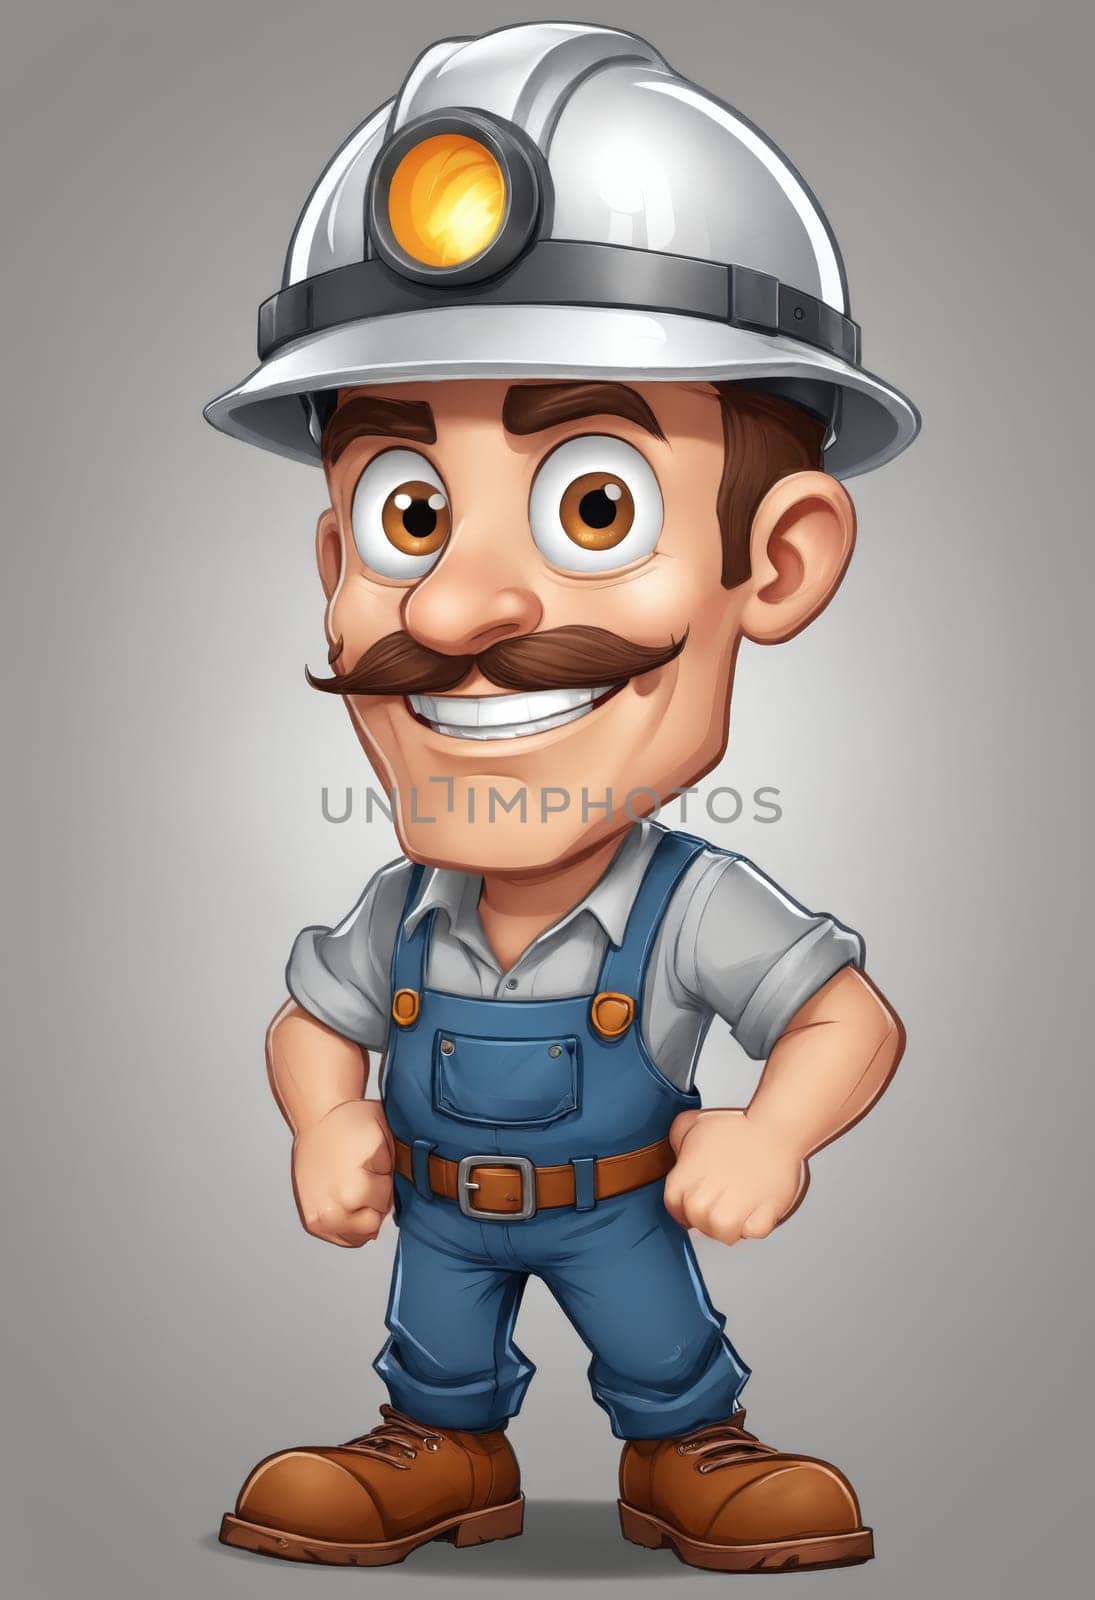 Miner depiction in a hard hat with light, secure suspenders, brown pants, and work boots for tough conditions.